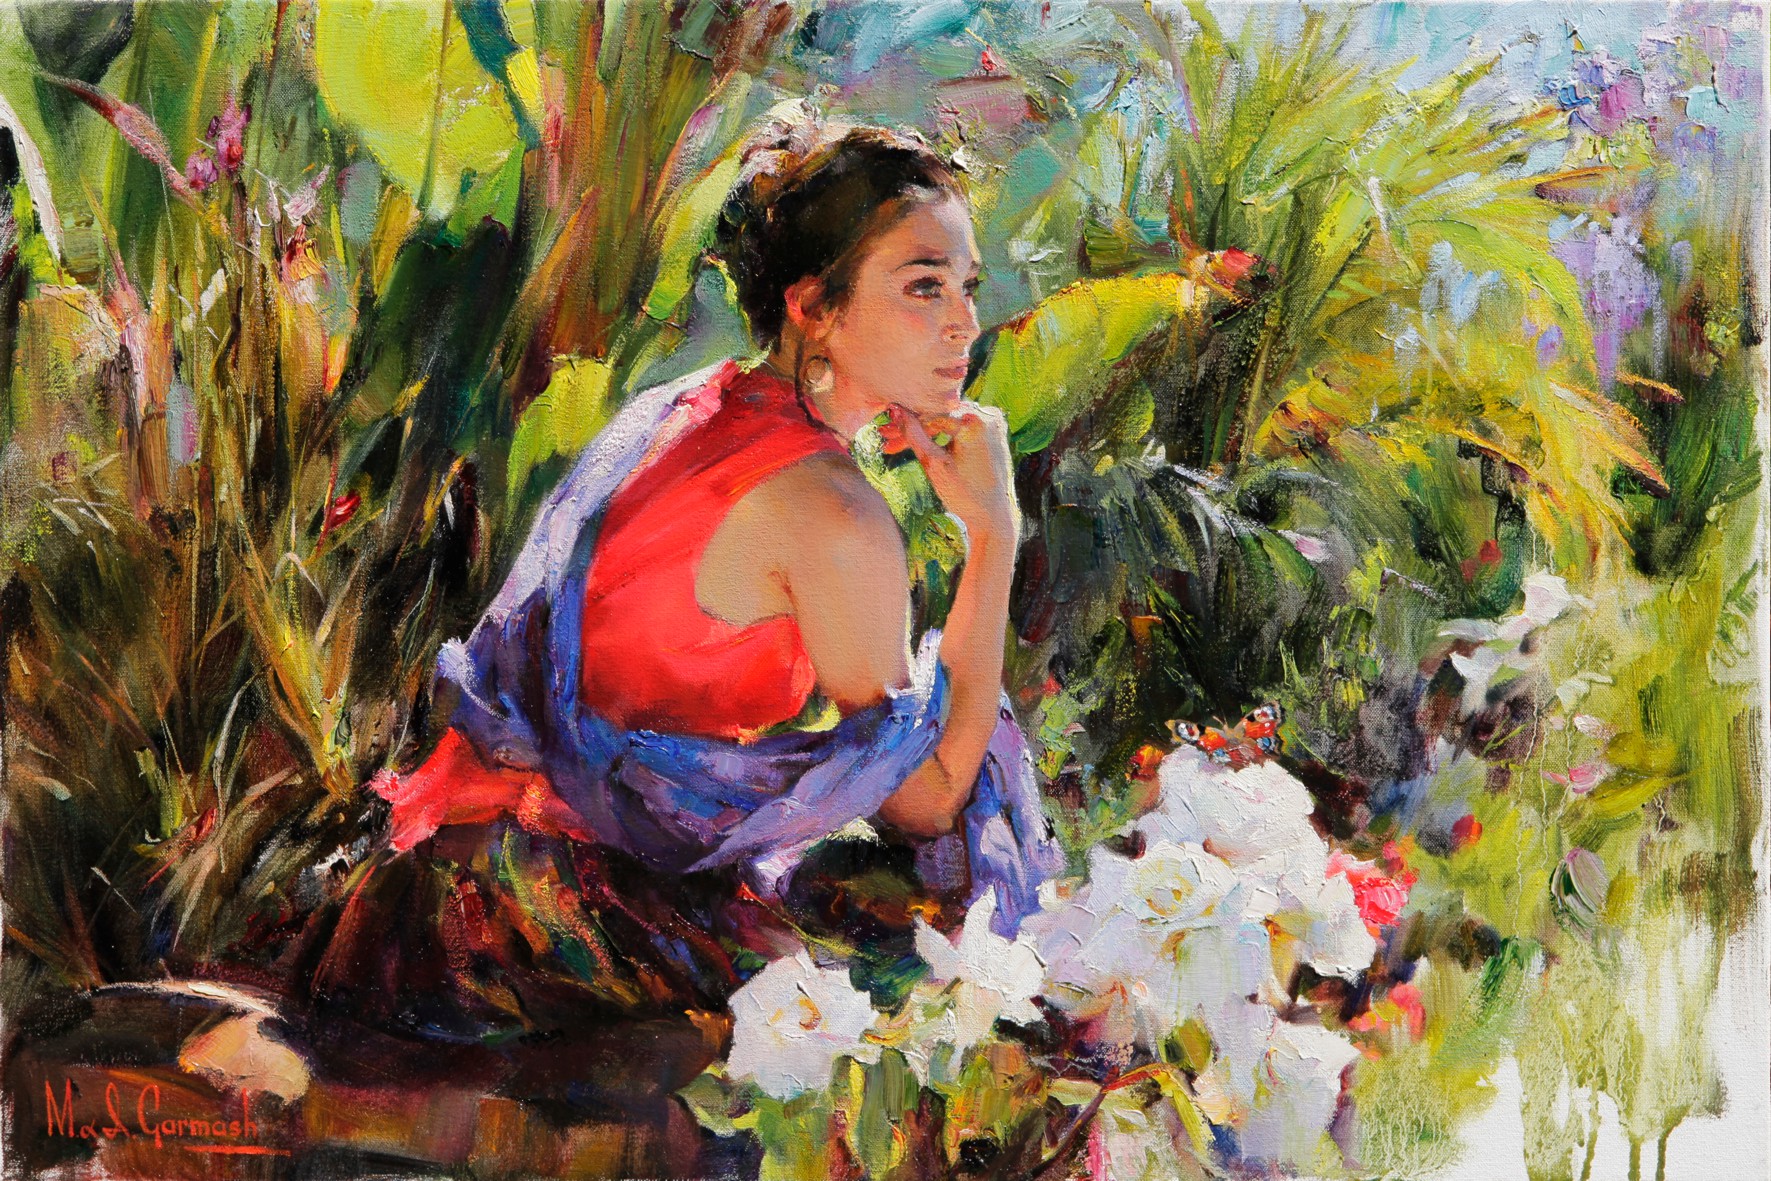 Watching a Butterfly - original painting -
by Michael and Inessa Garmash